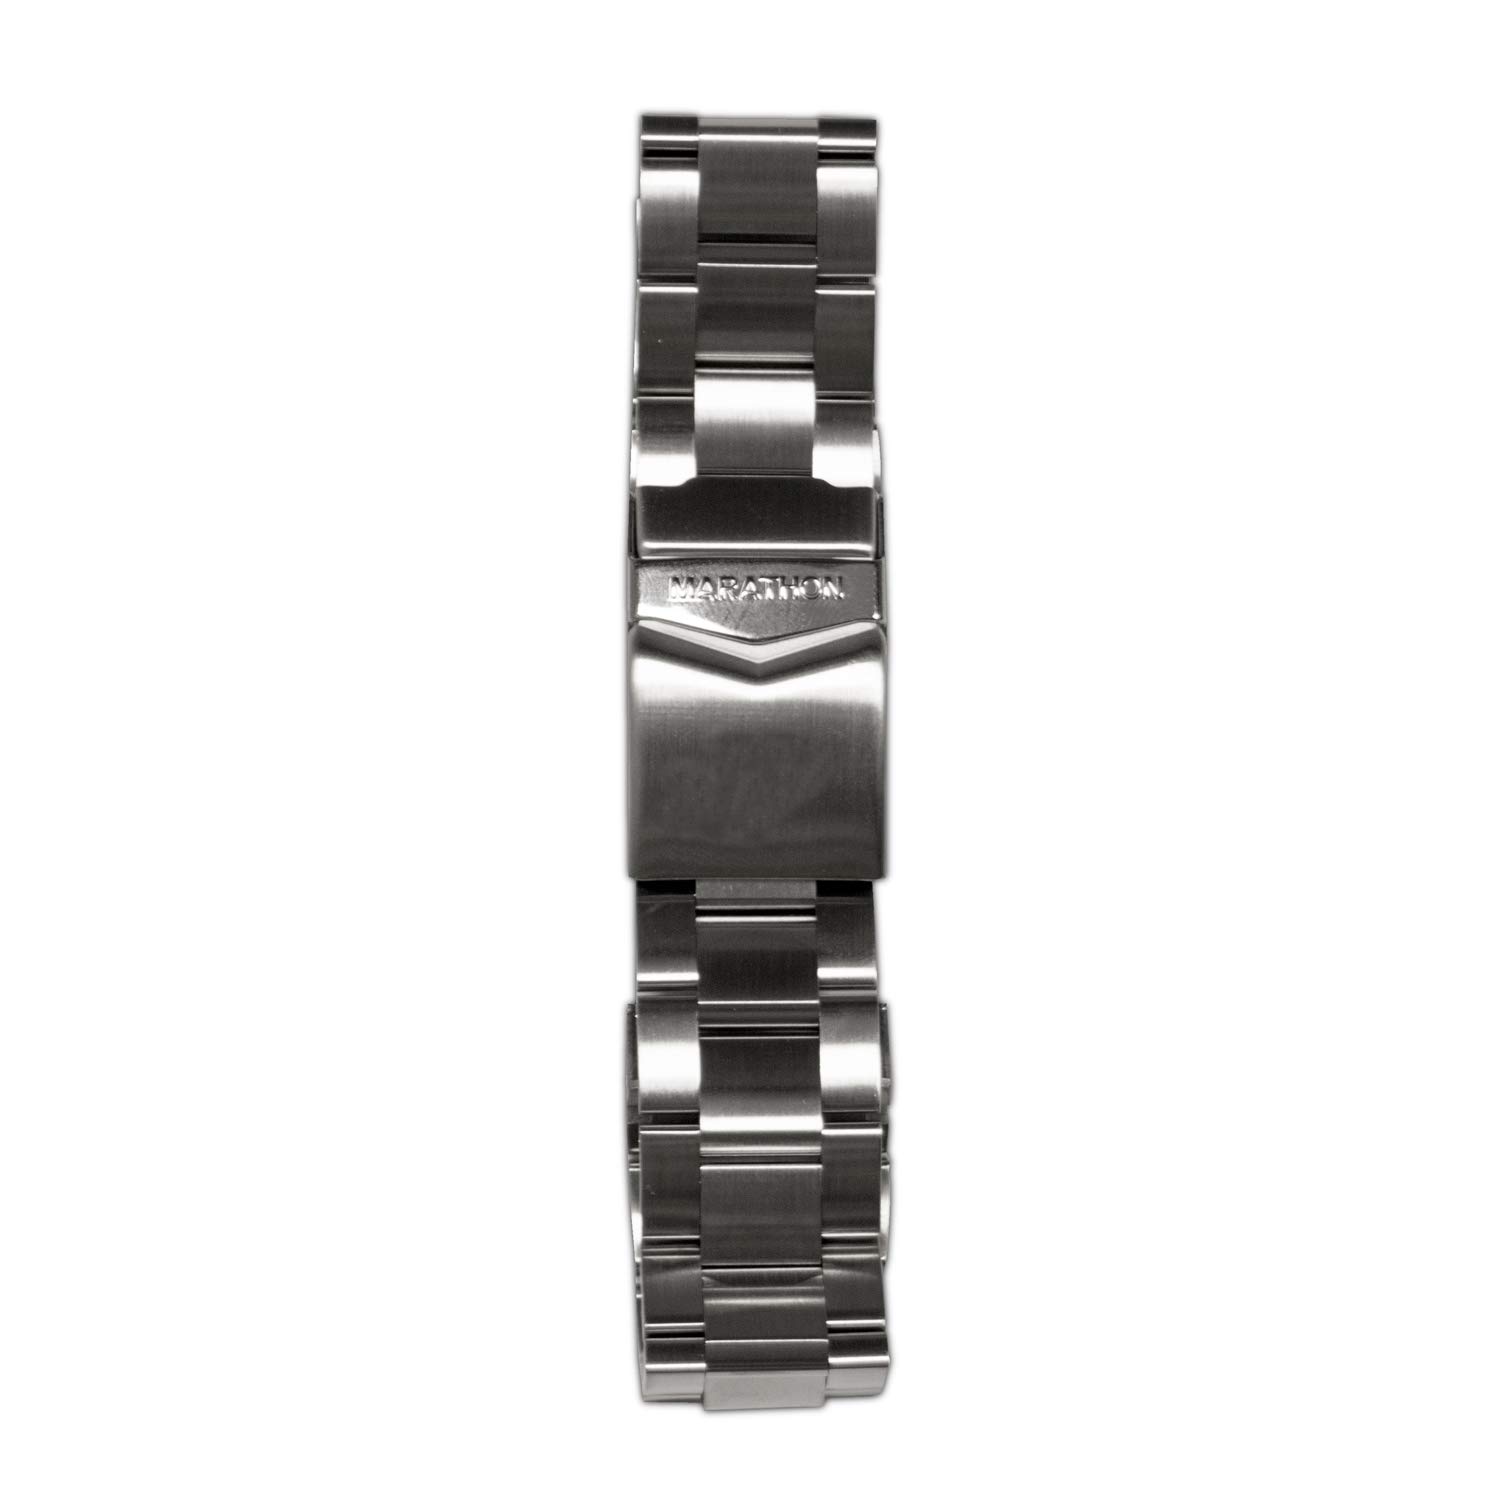 MARATHON Watch Military Grade Stainless Steel Bracelets (Available in 18mm / 20mm / 22mm)